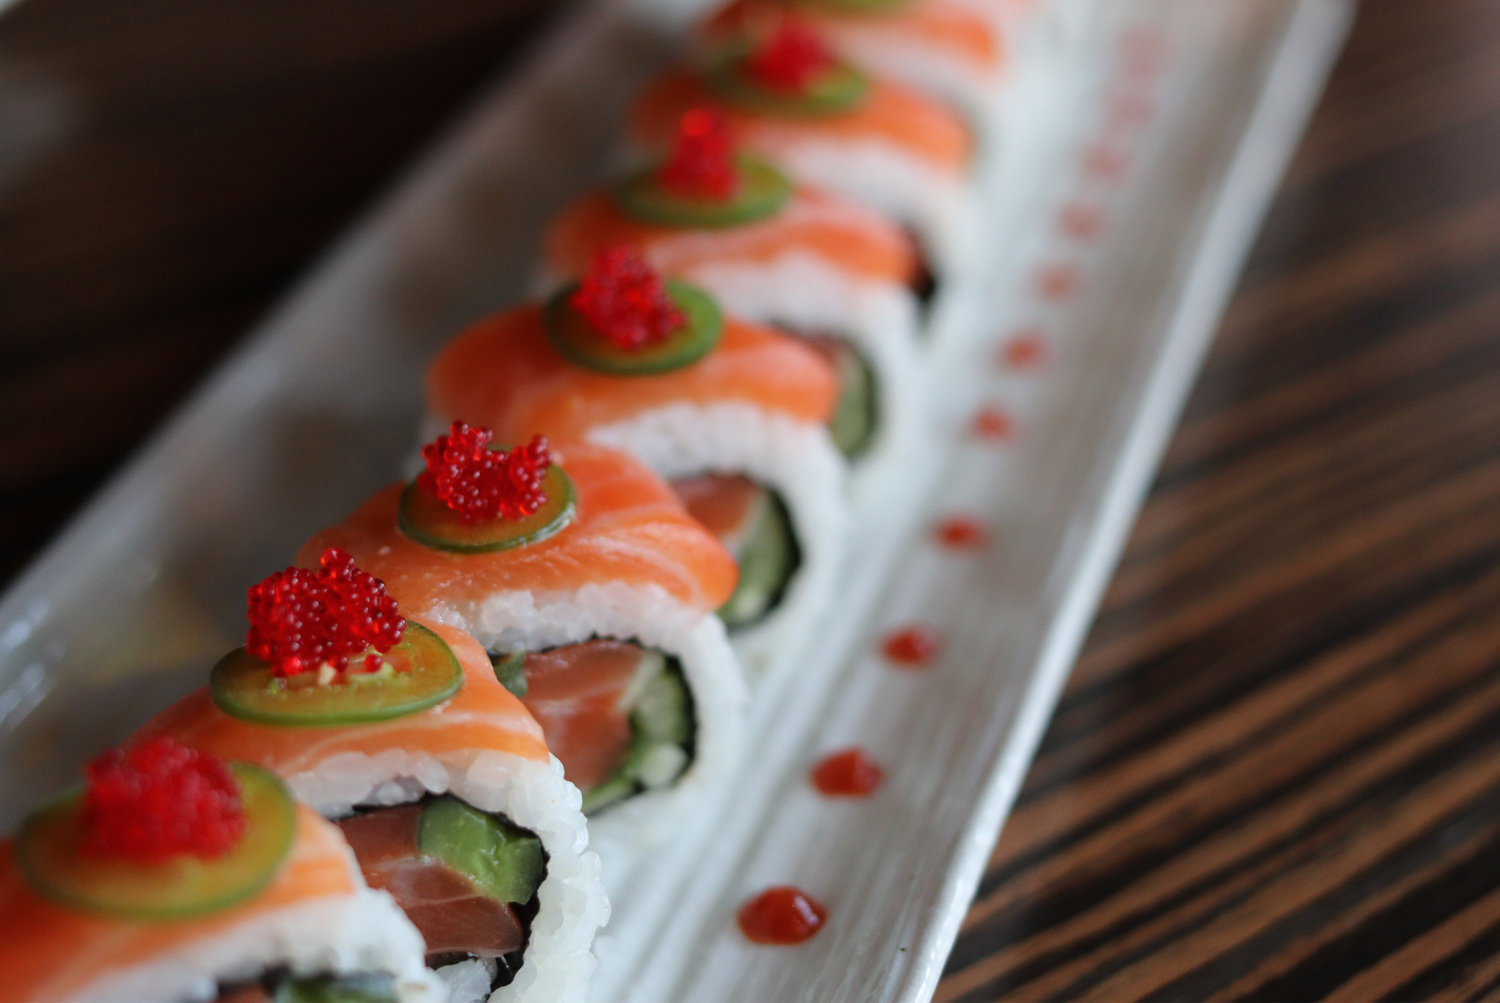 A Ten Prime roll uses vibrant masago as a finishing touch